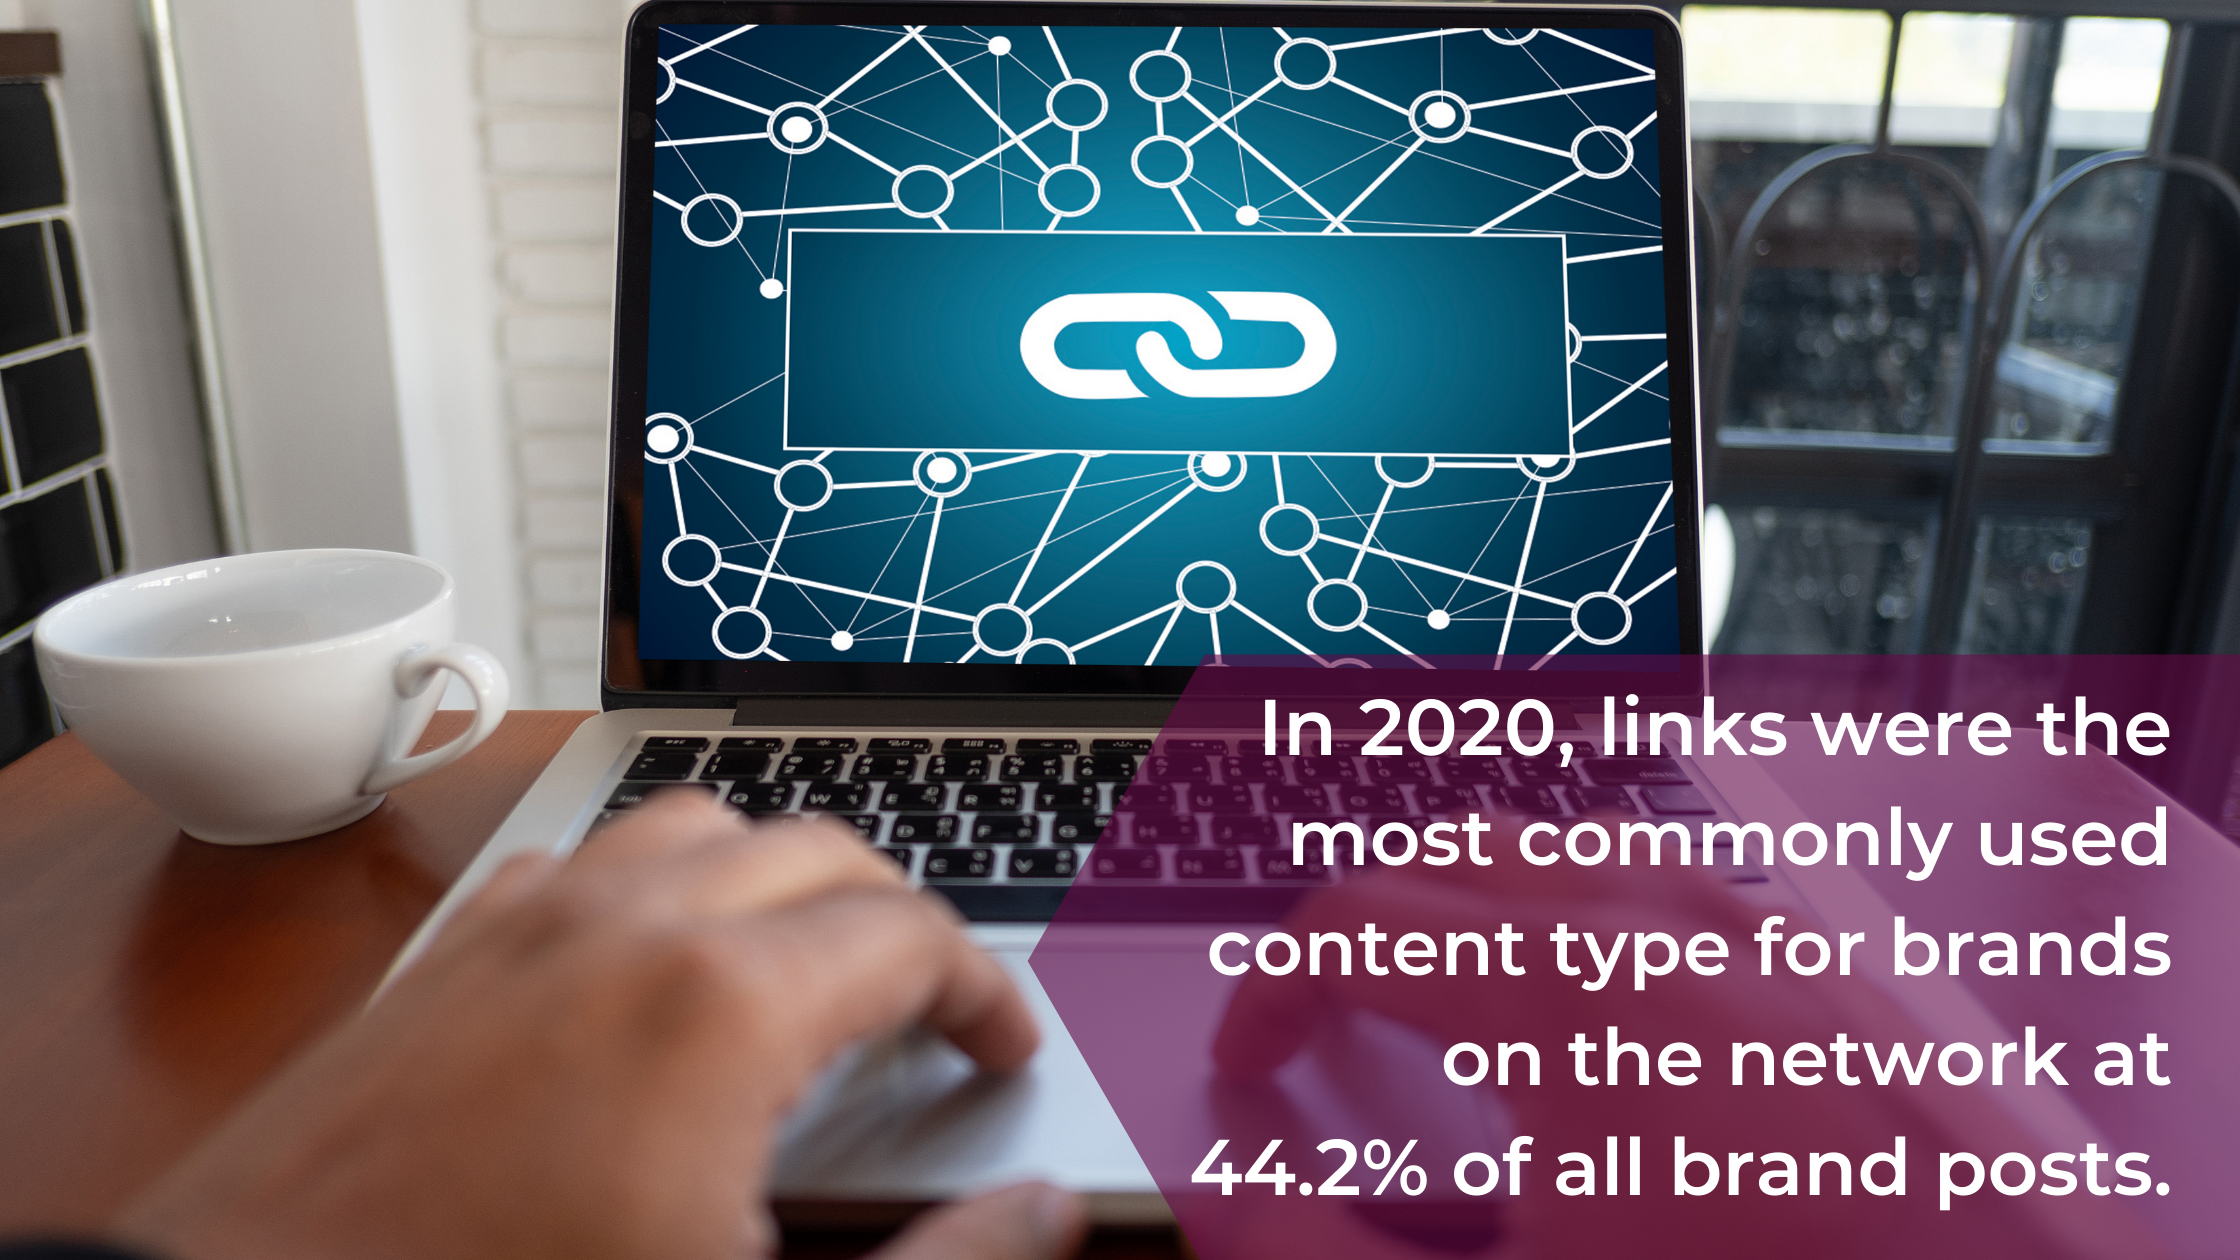 links were the most commonly used content type in 2020